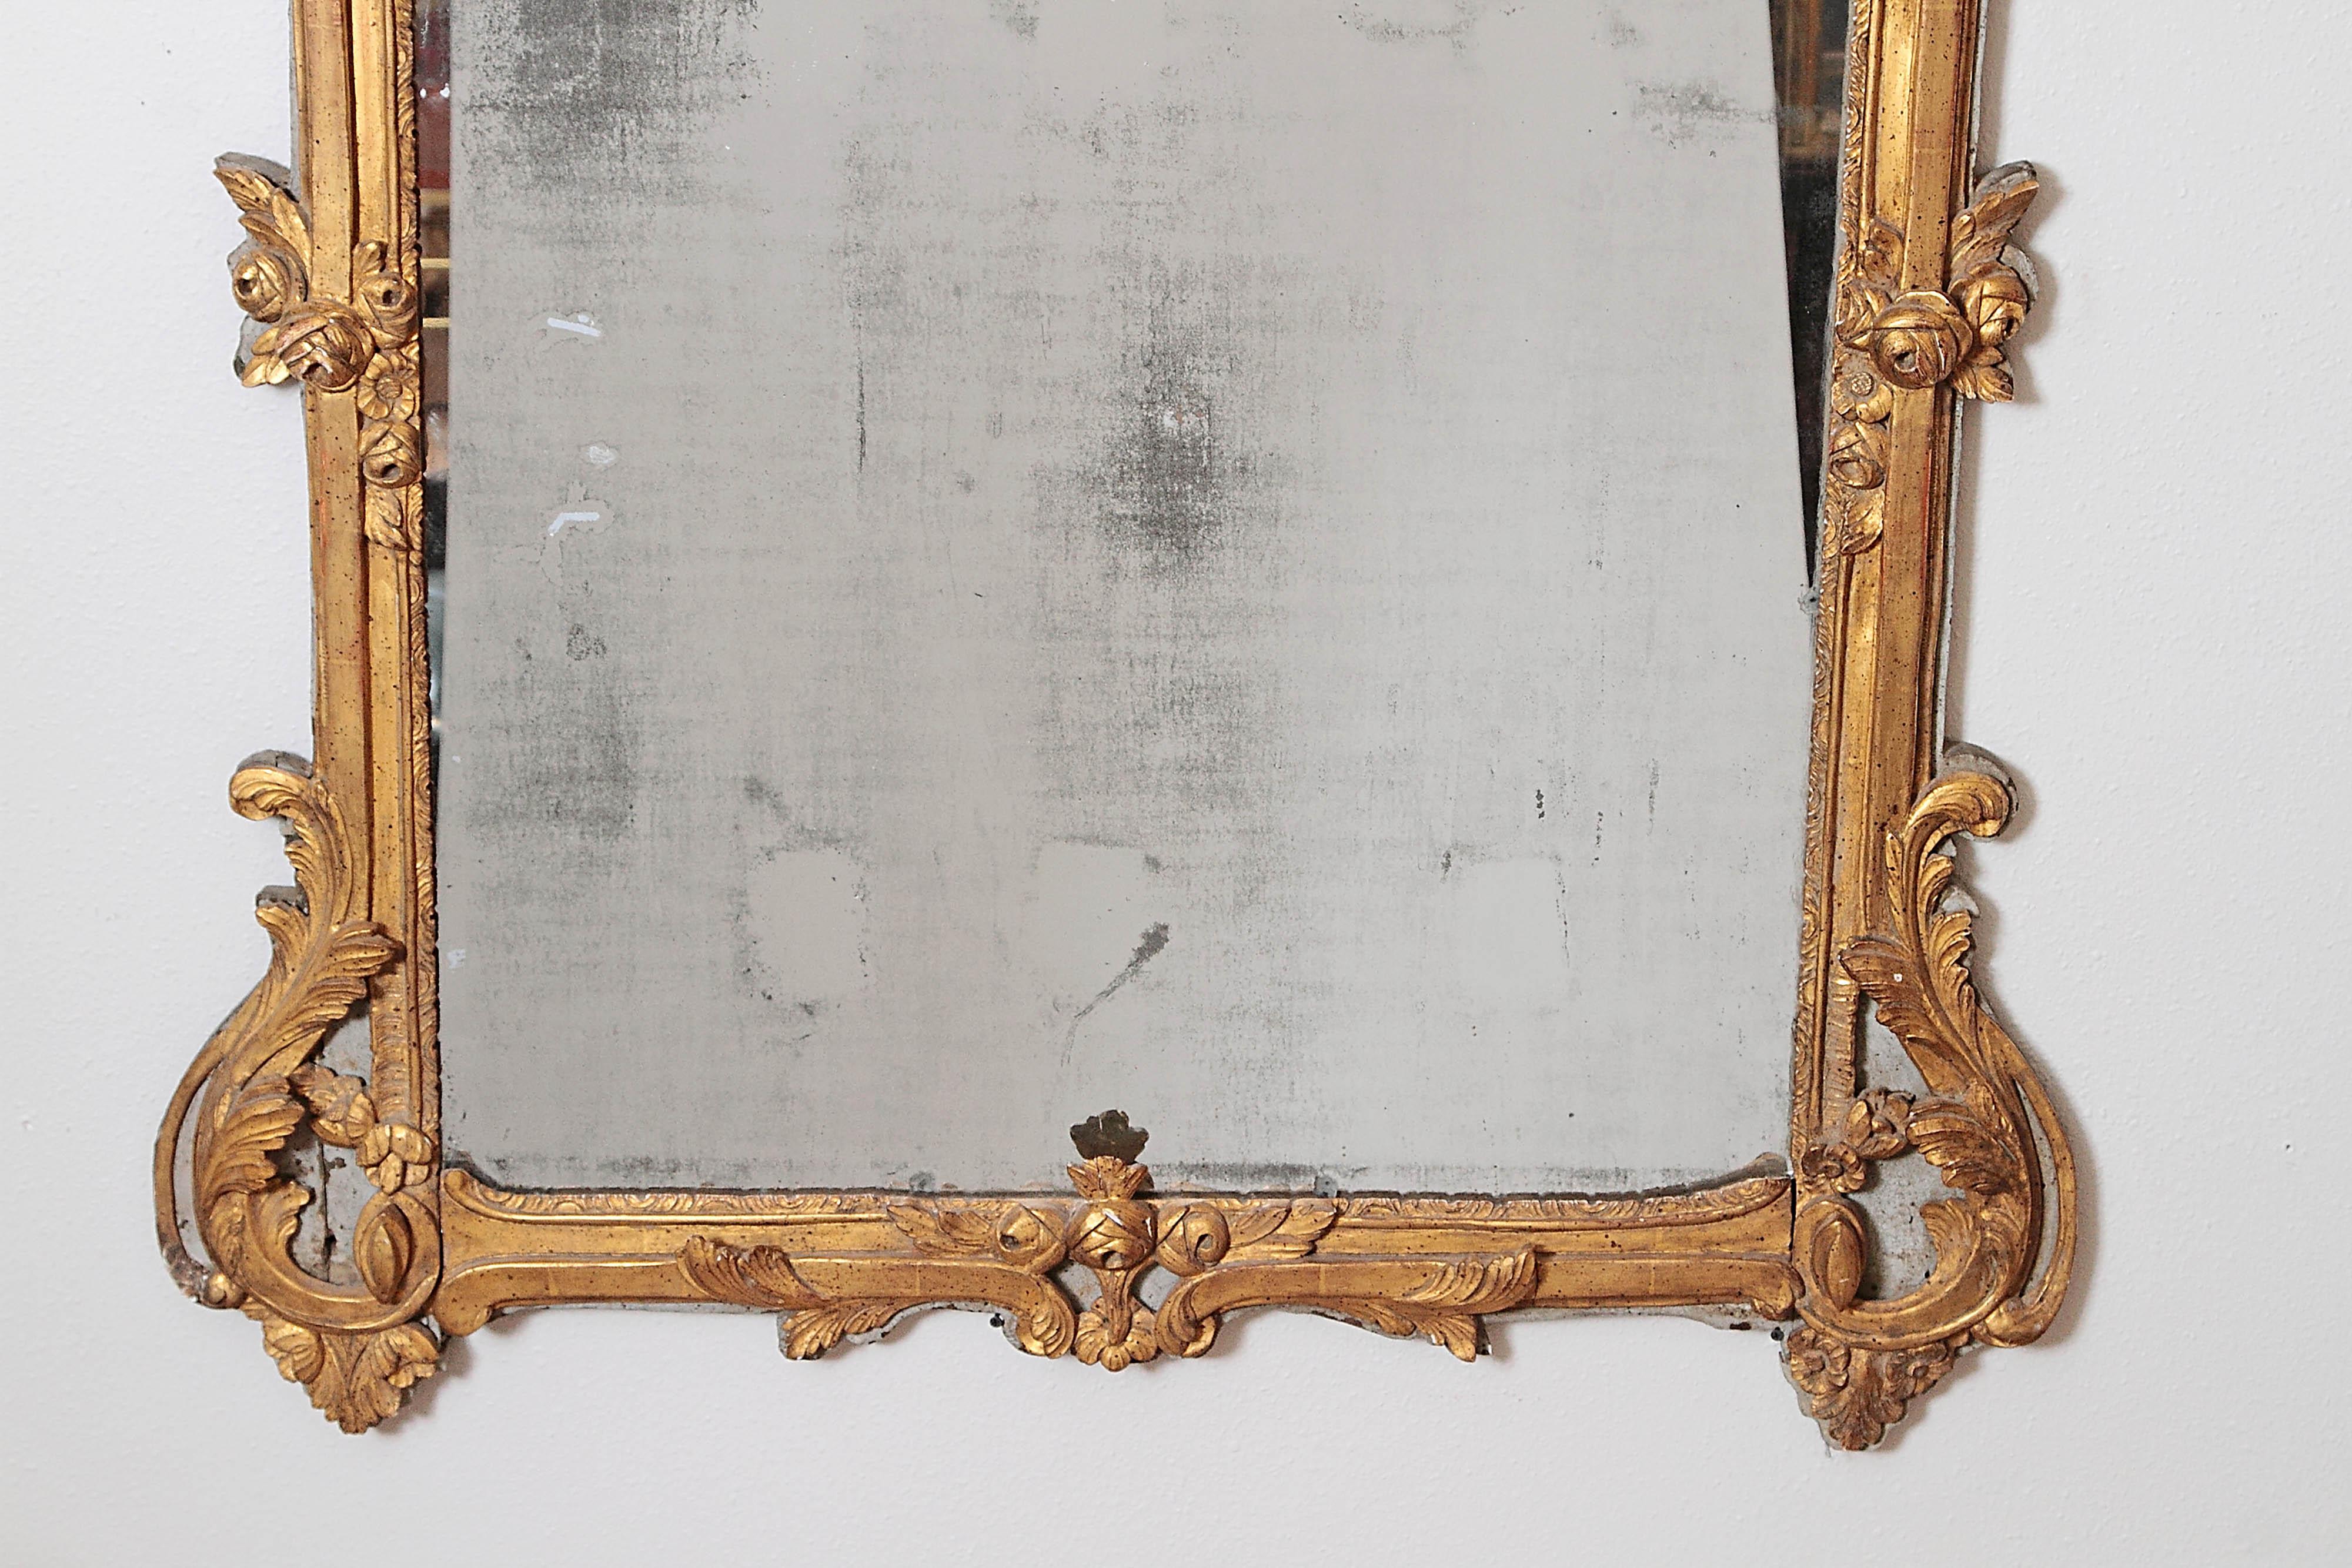 A large Louis XV style hand carved, painted and gilded mirror having its original gilding over carved wood with a French grey painted background, retaining its original two-part mirror plate. Likely region of Provence.